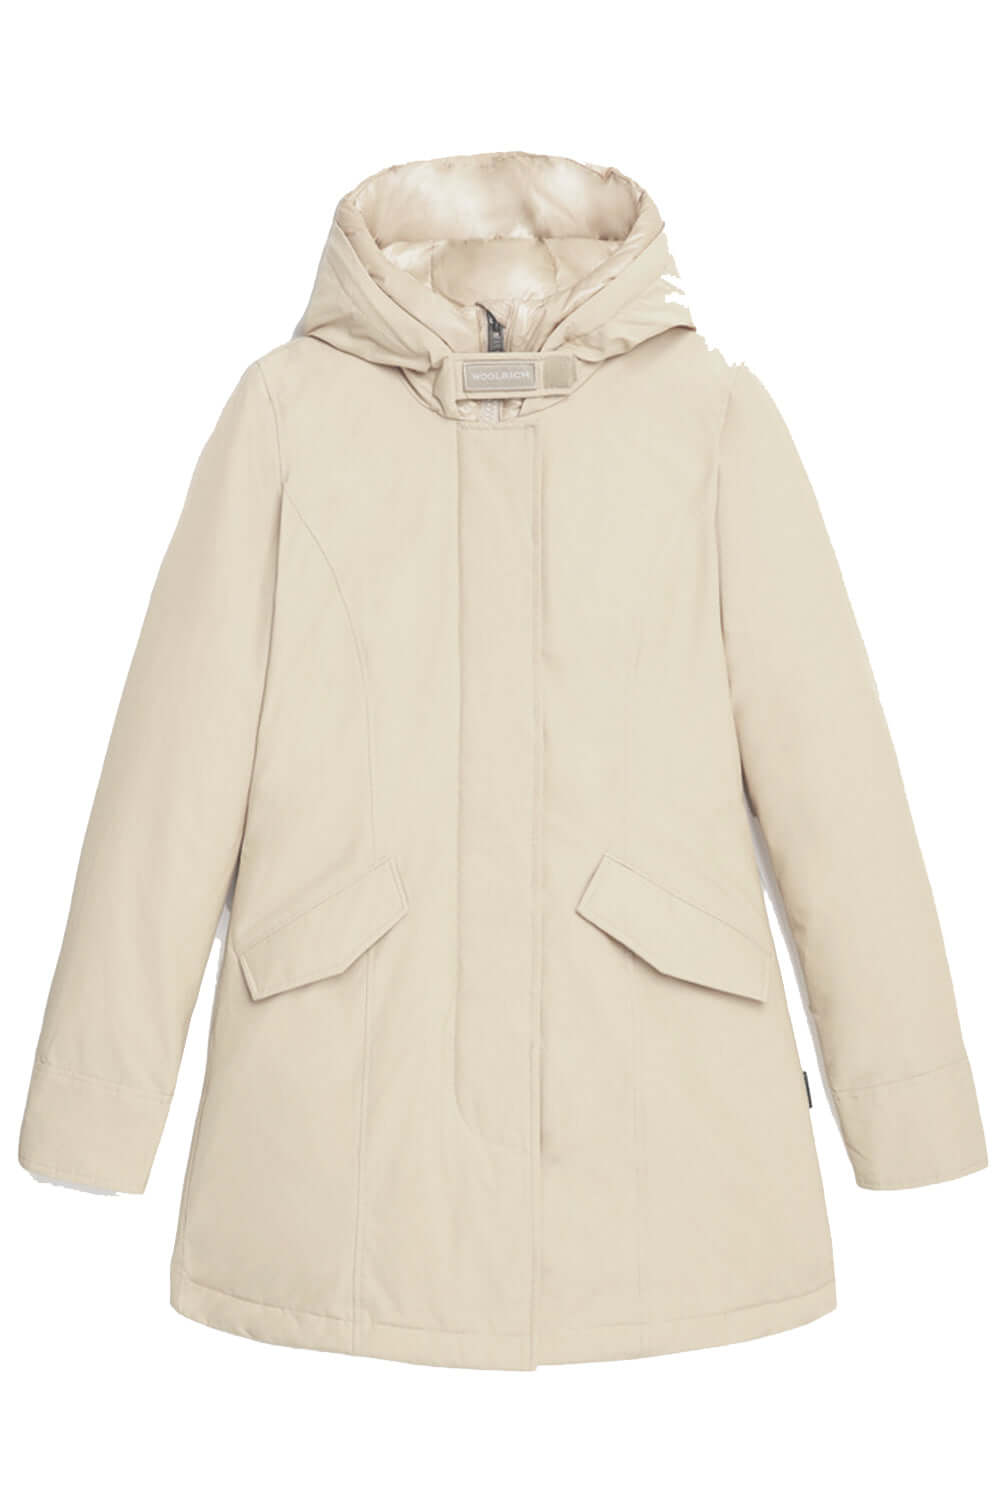 Image of Giubbotto arctic parka - WOOLRICH